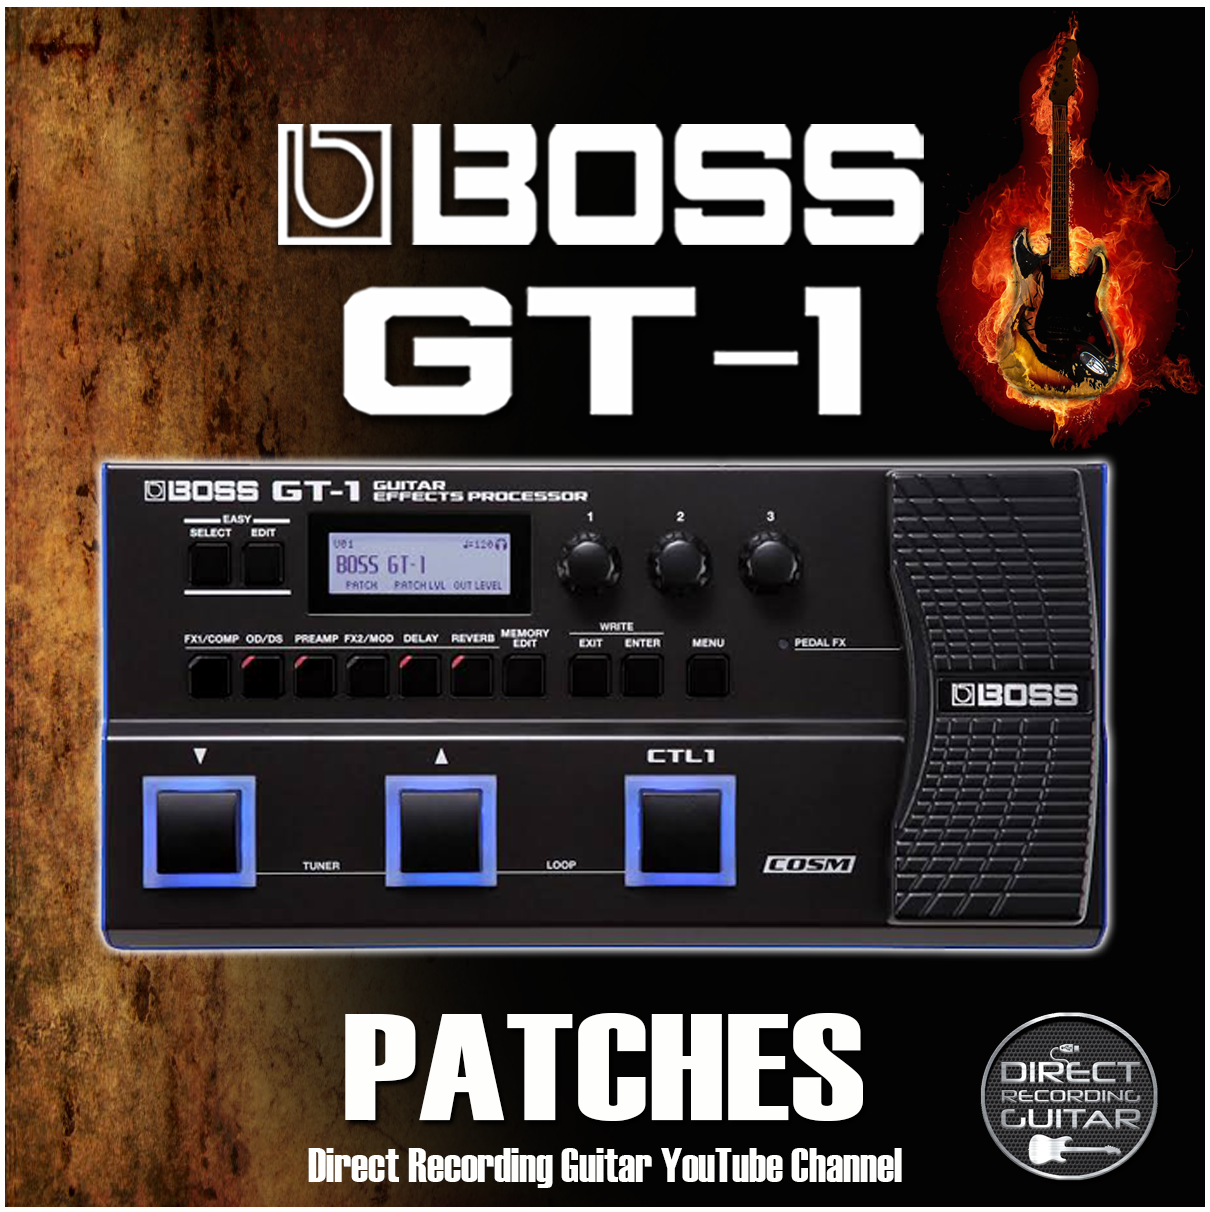 BOSS GT 1 Patches Guitar Presets